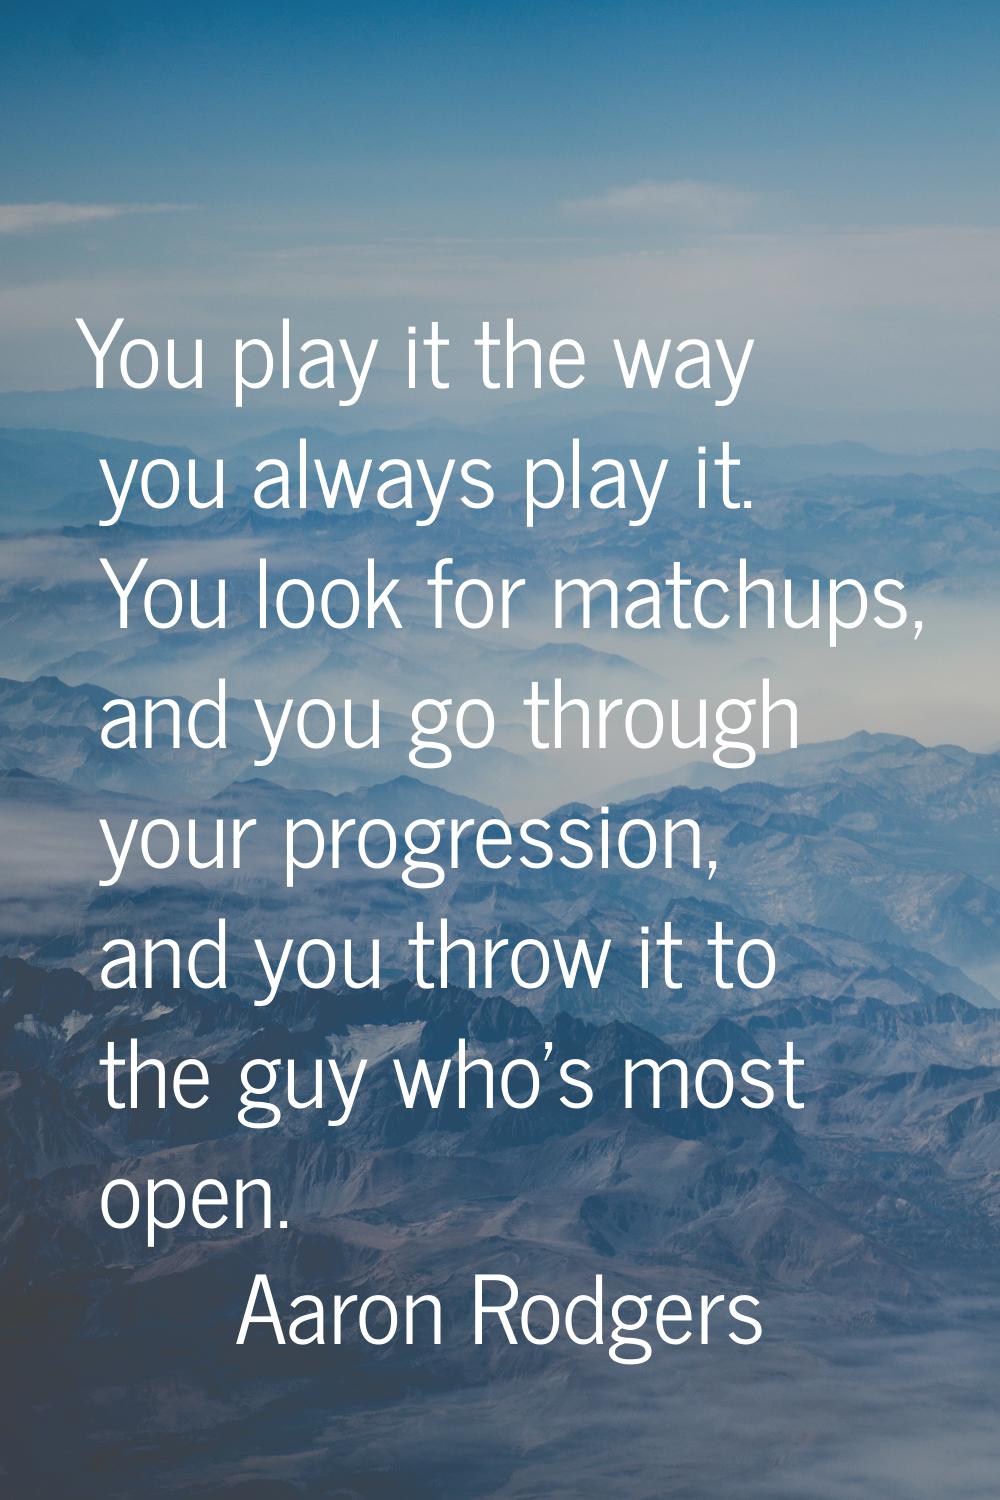 You play it the way you always play it. You look for matchups, and you go through your progression,